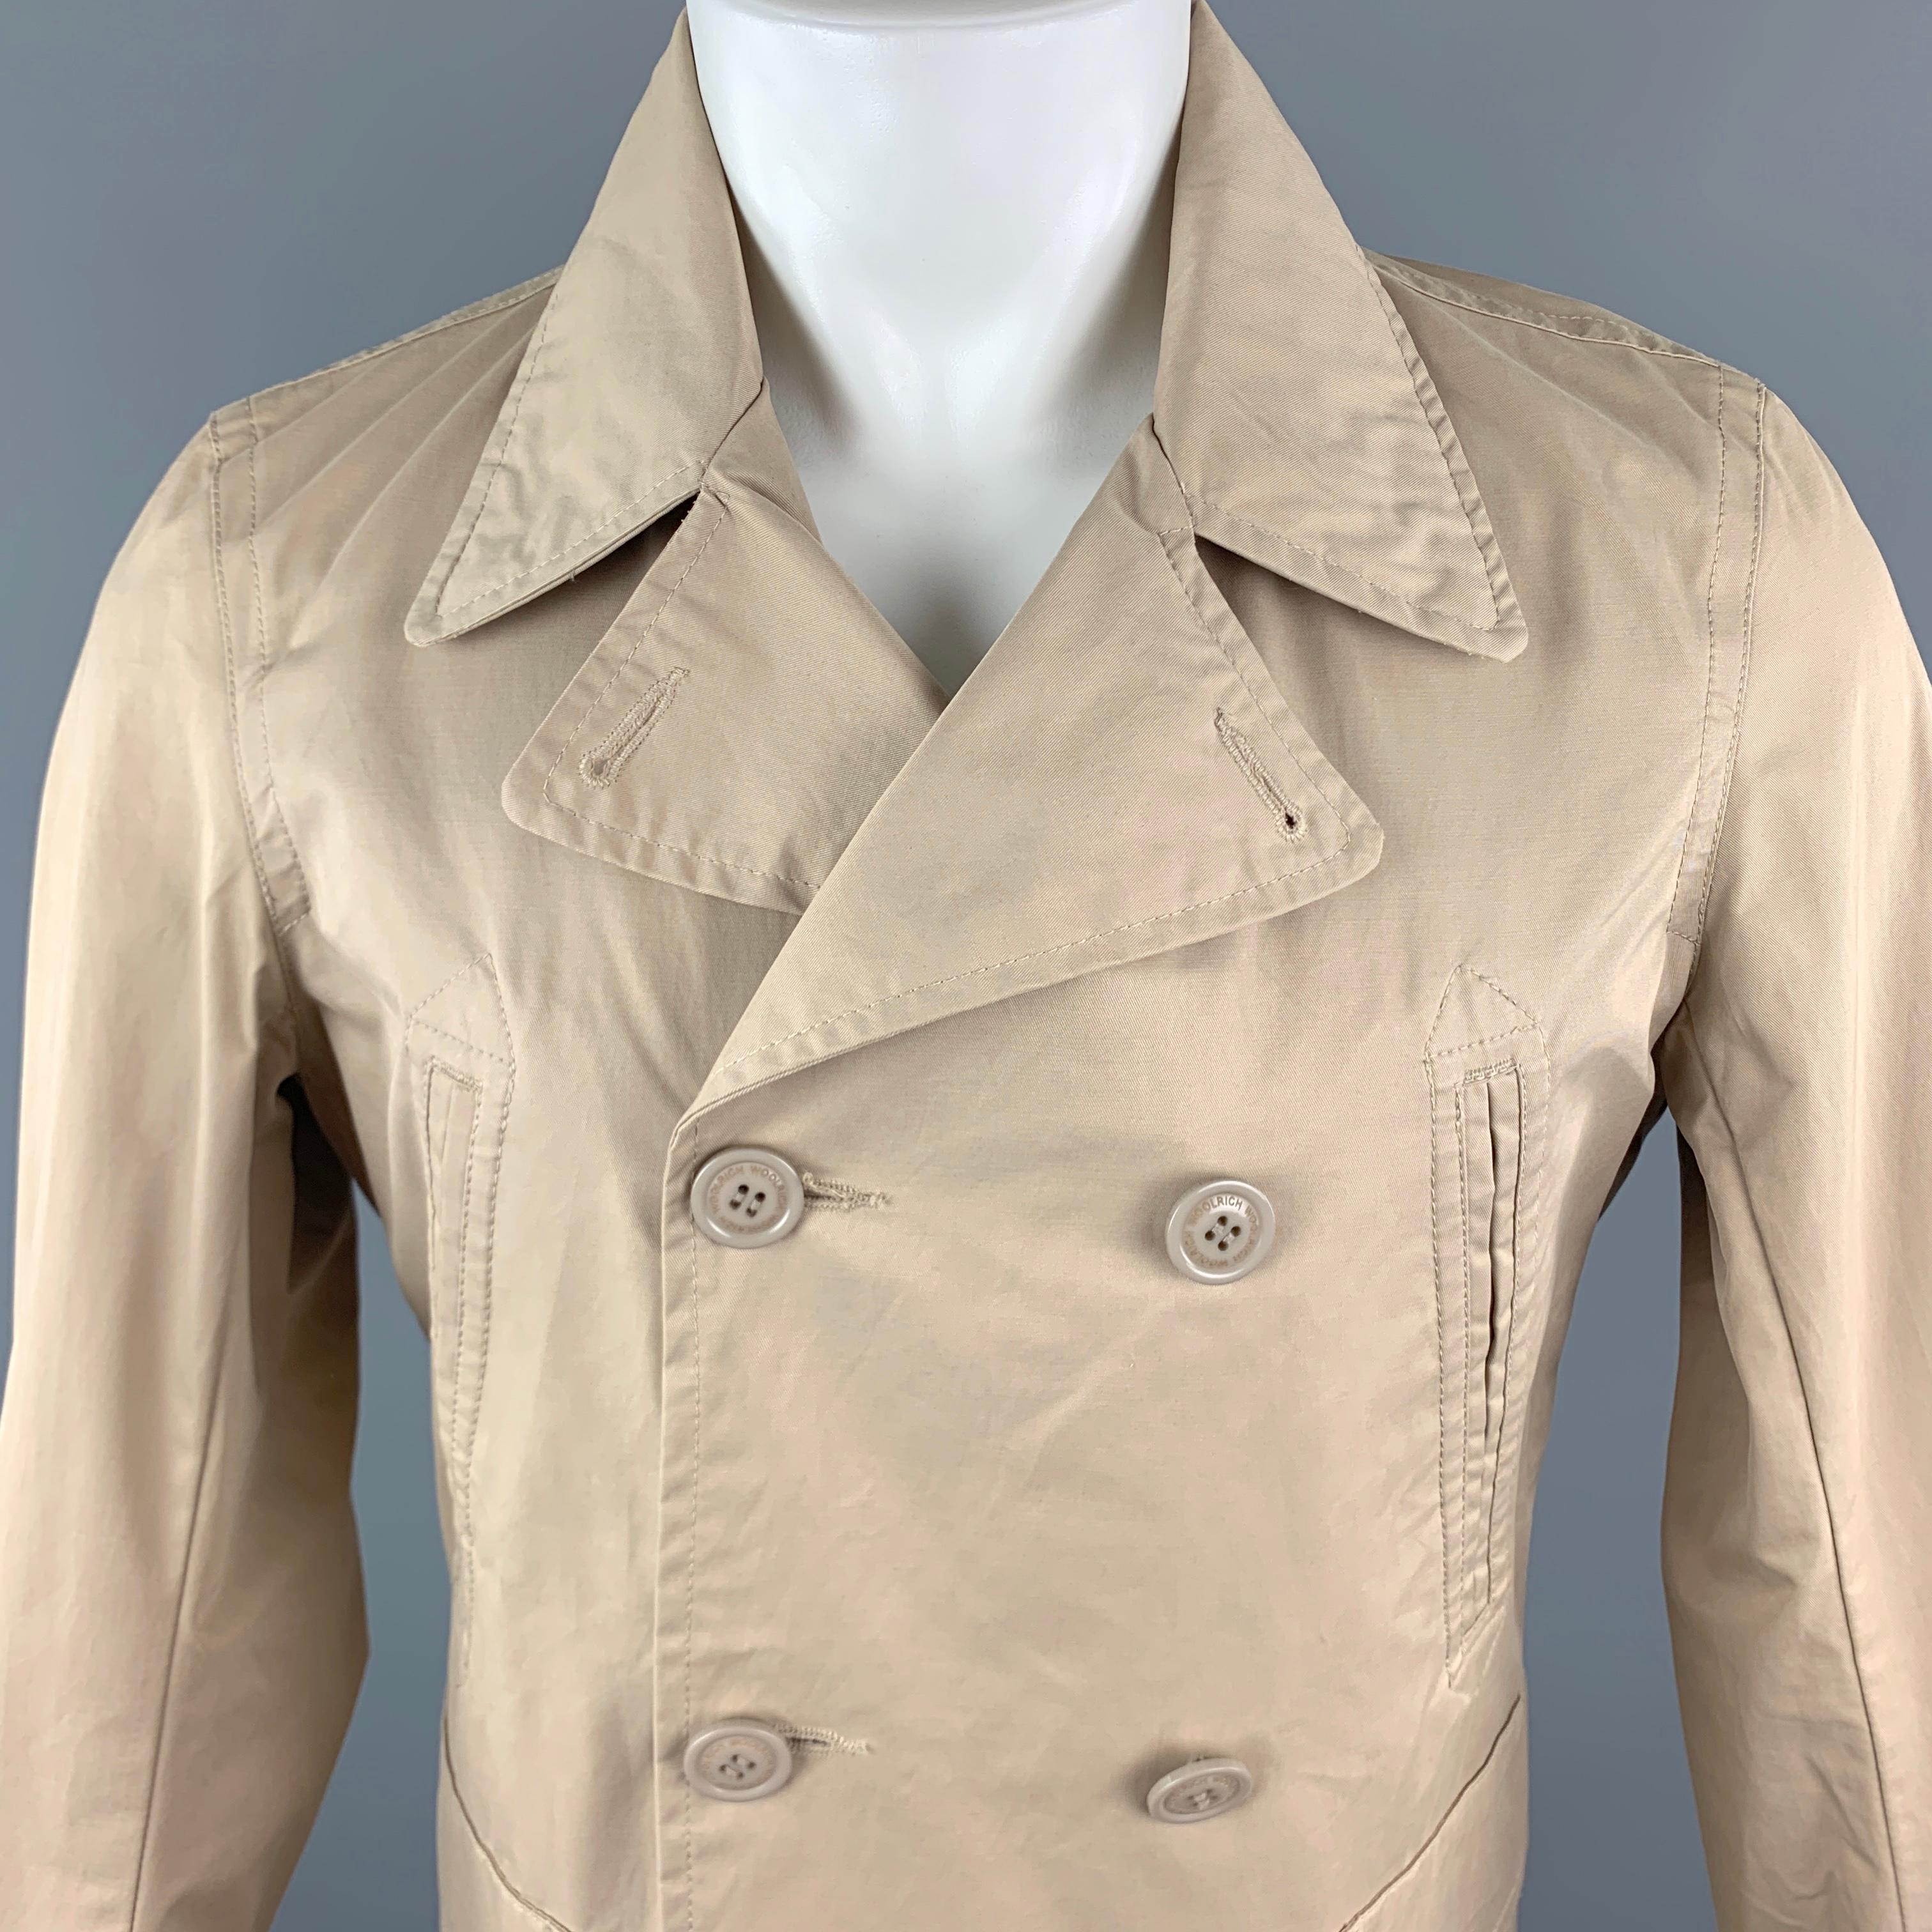 WOOLRICH Jacket comes in a tan tone in a solid cotton blend material, with a pointed collar, double breasted, with slit and patch pockets, functional buttons at cuffs, internal pockets, unlined. 

New With Tags.
Marked: S

Measurements:

Shoulder: